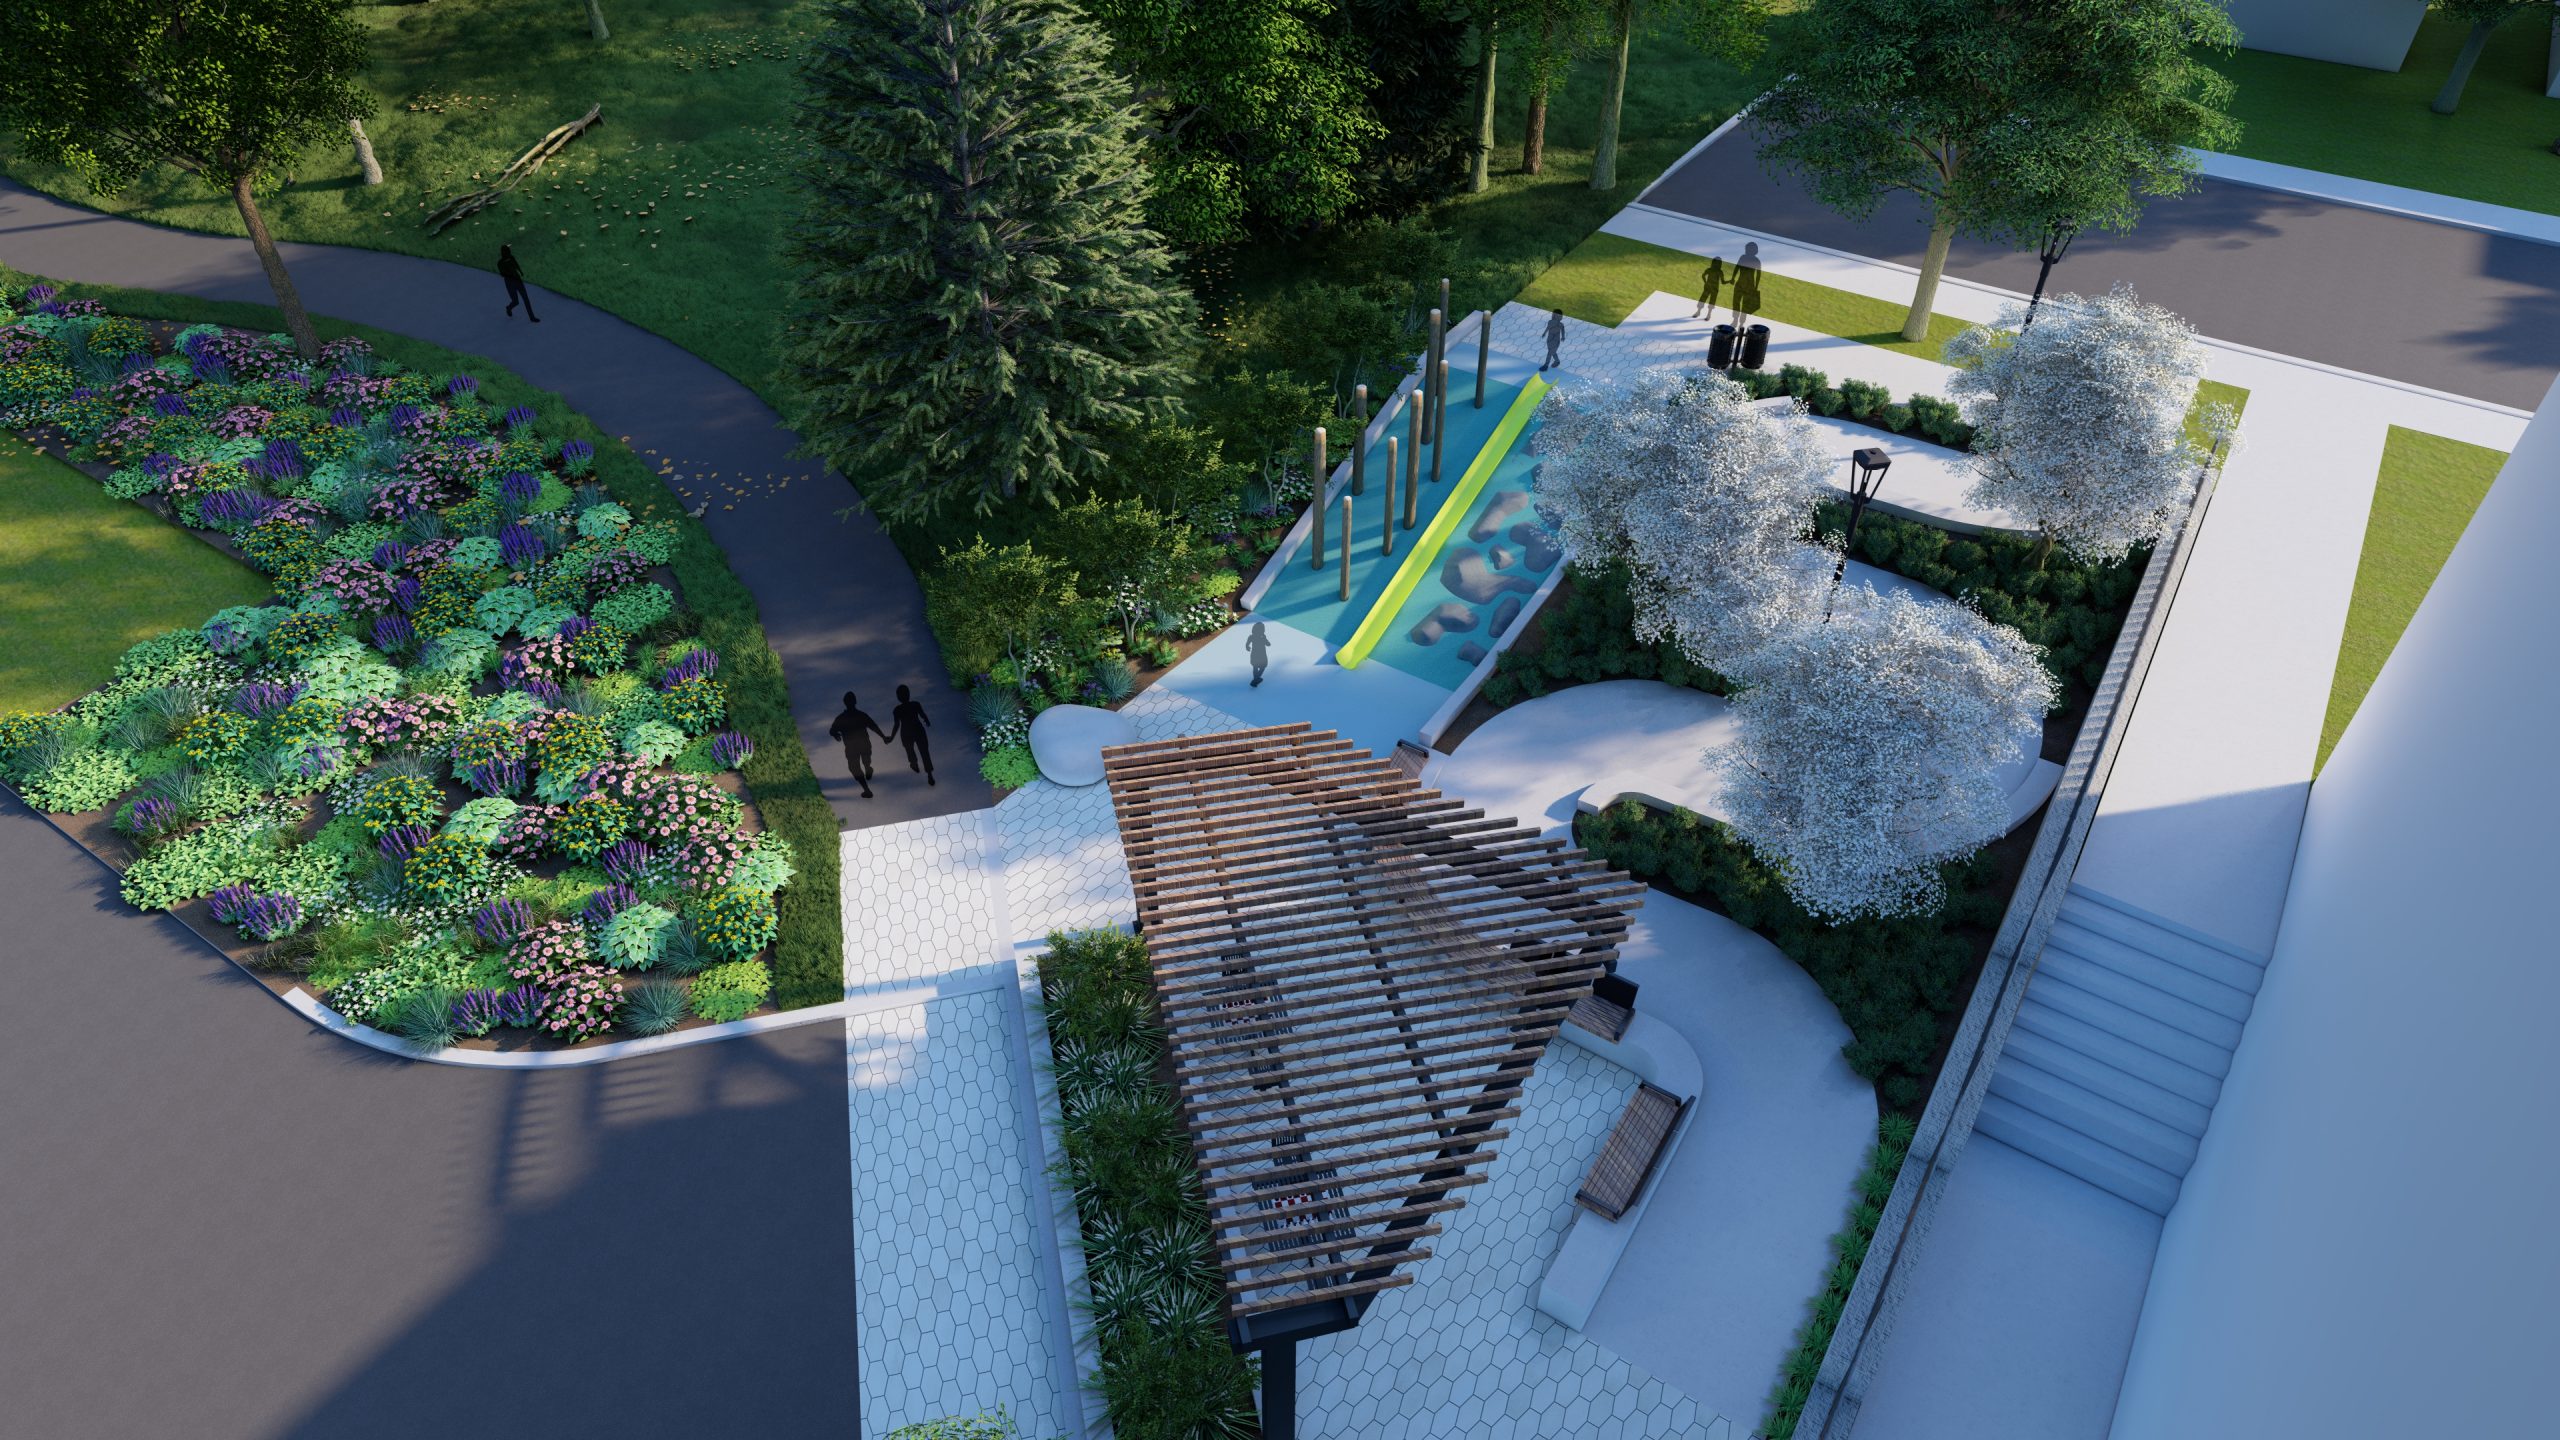 Perspective rendering of the revised concept design, providing an aerial perspective of the new park looking north west. Pictured are the shade structure, accessible connection to the nearby ravine, children